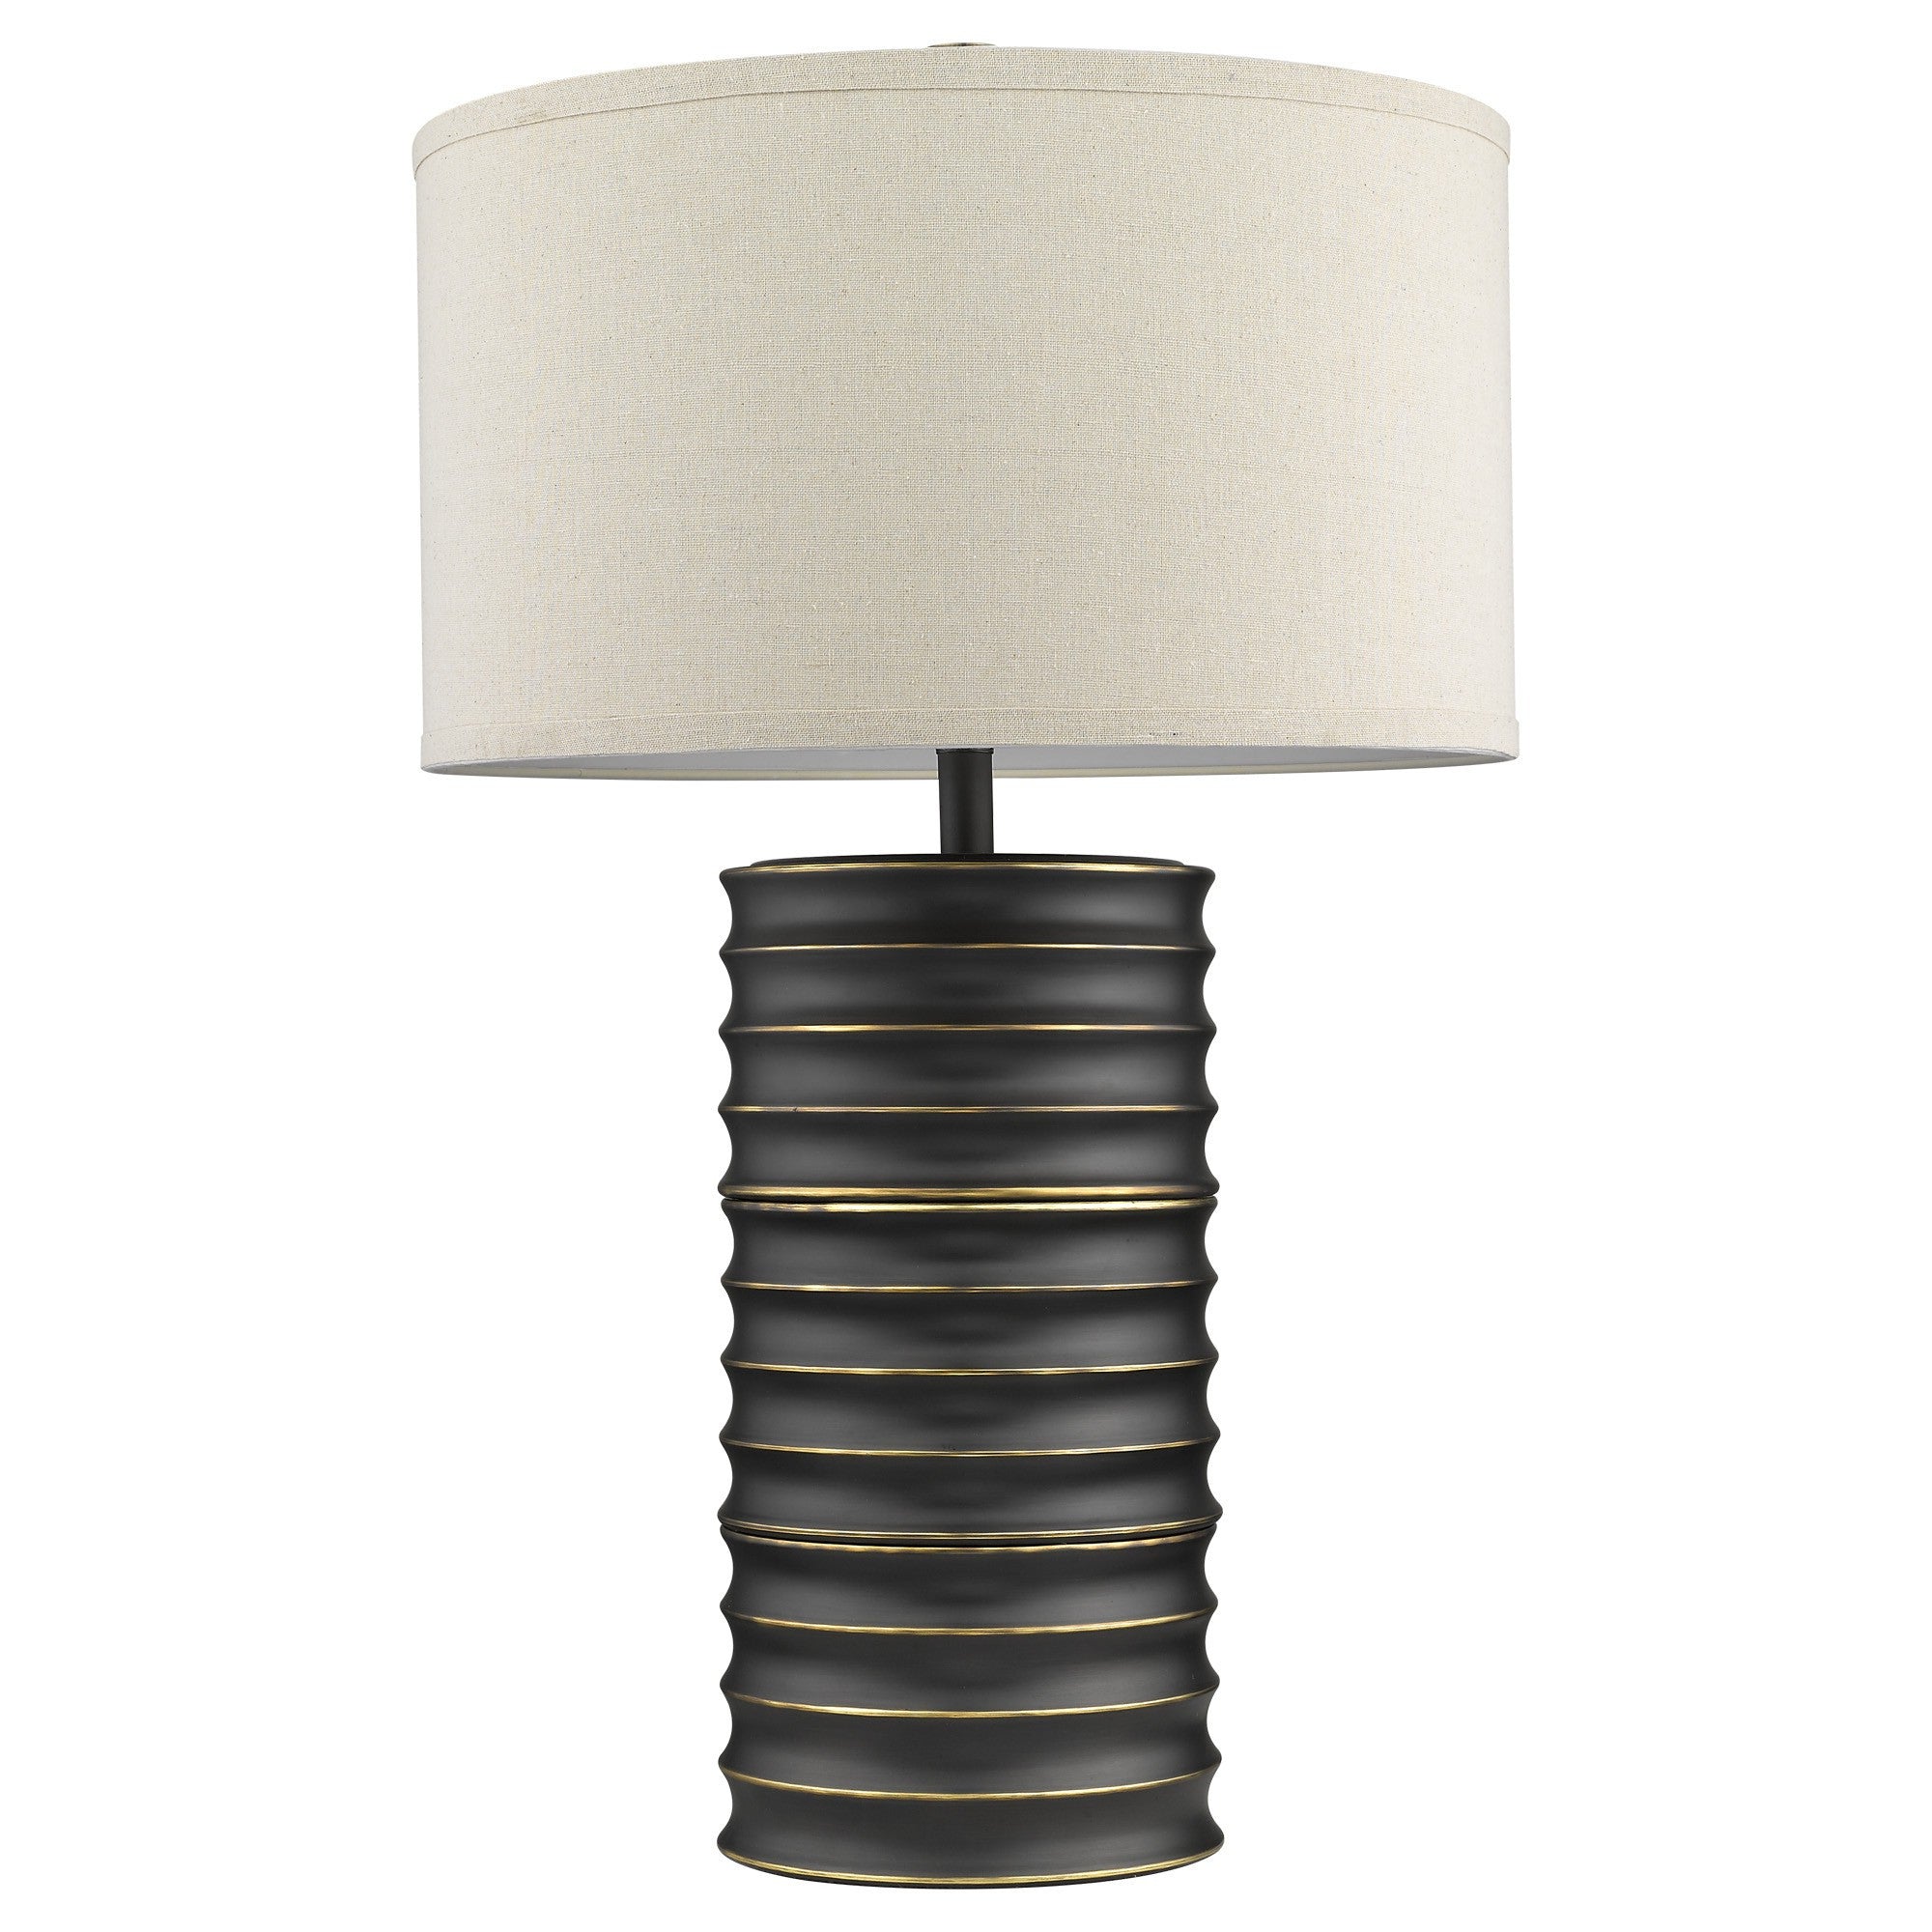 29" Black Ceramic Column Table Lamp With Off White Drum Shade